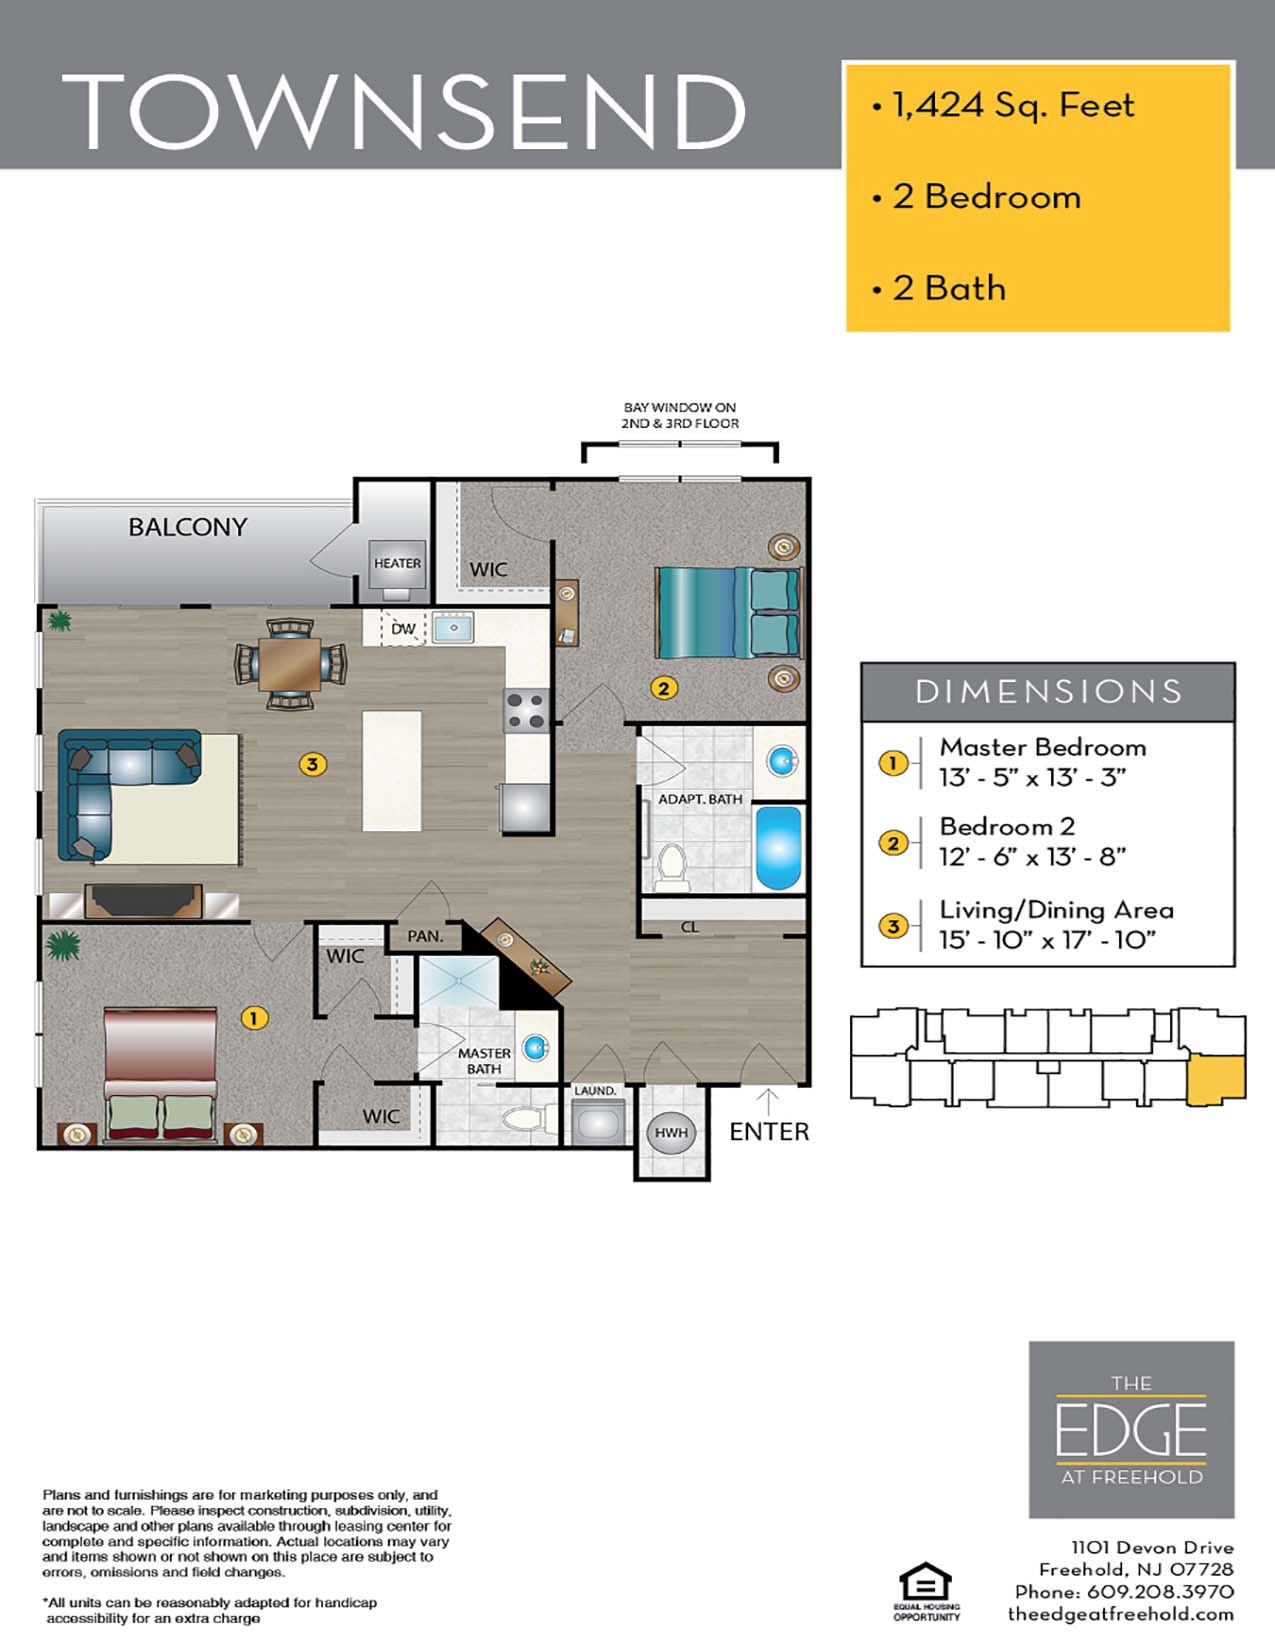 The Edge At Freehold Floor Plan Townsend